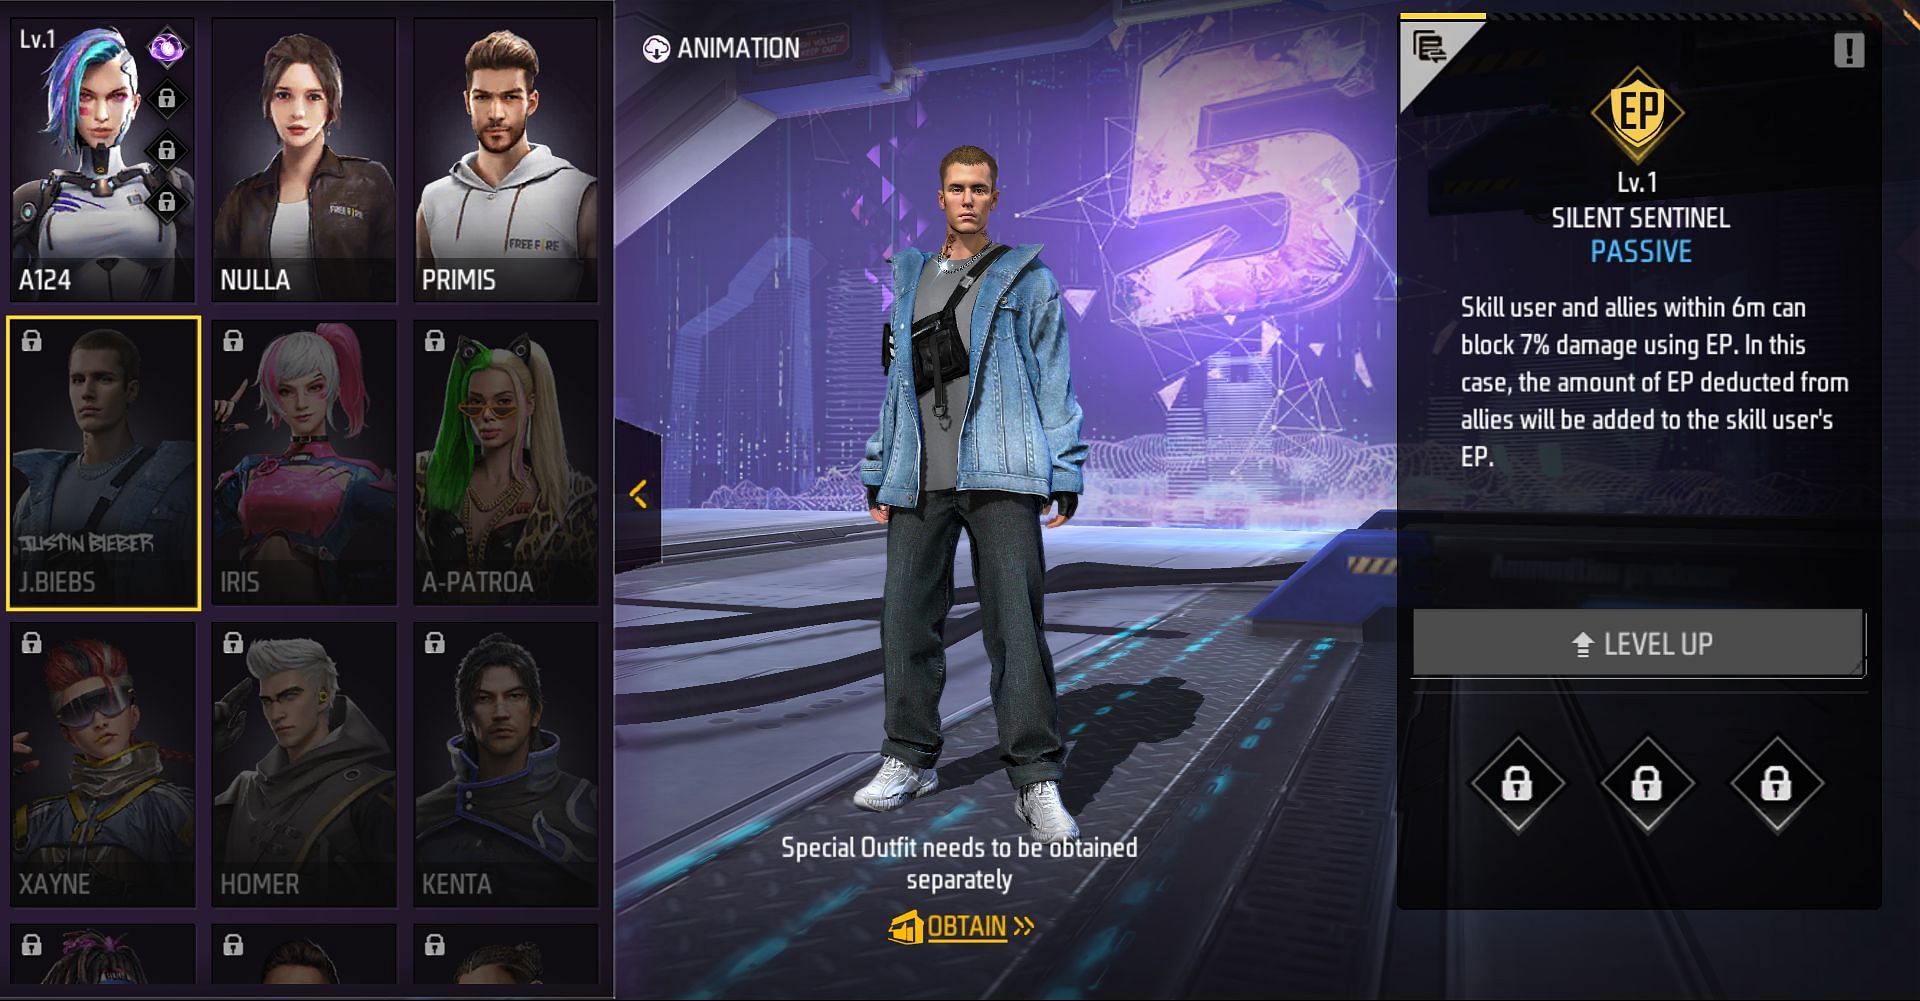 J.Biebs character has attracted a lot of hype (Image via Garena)